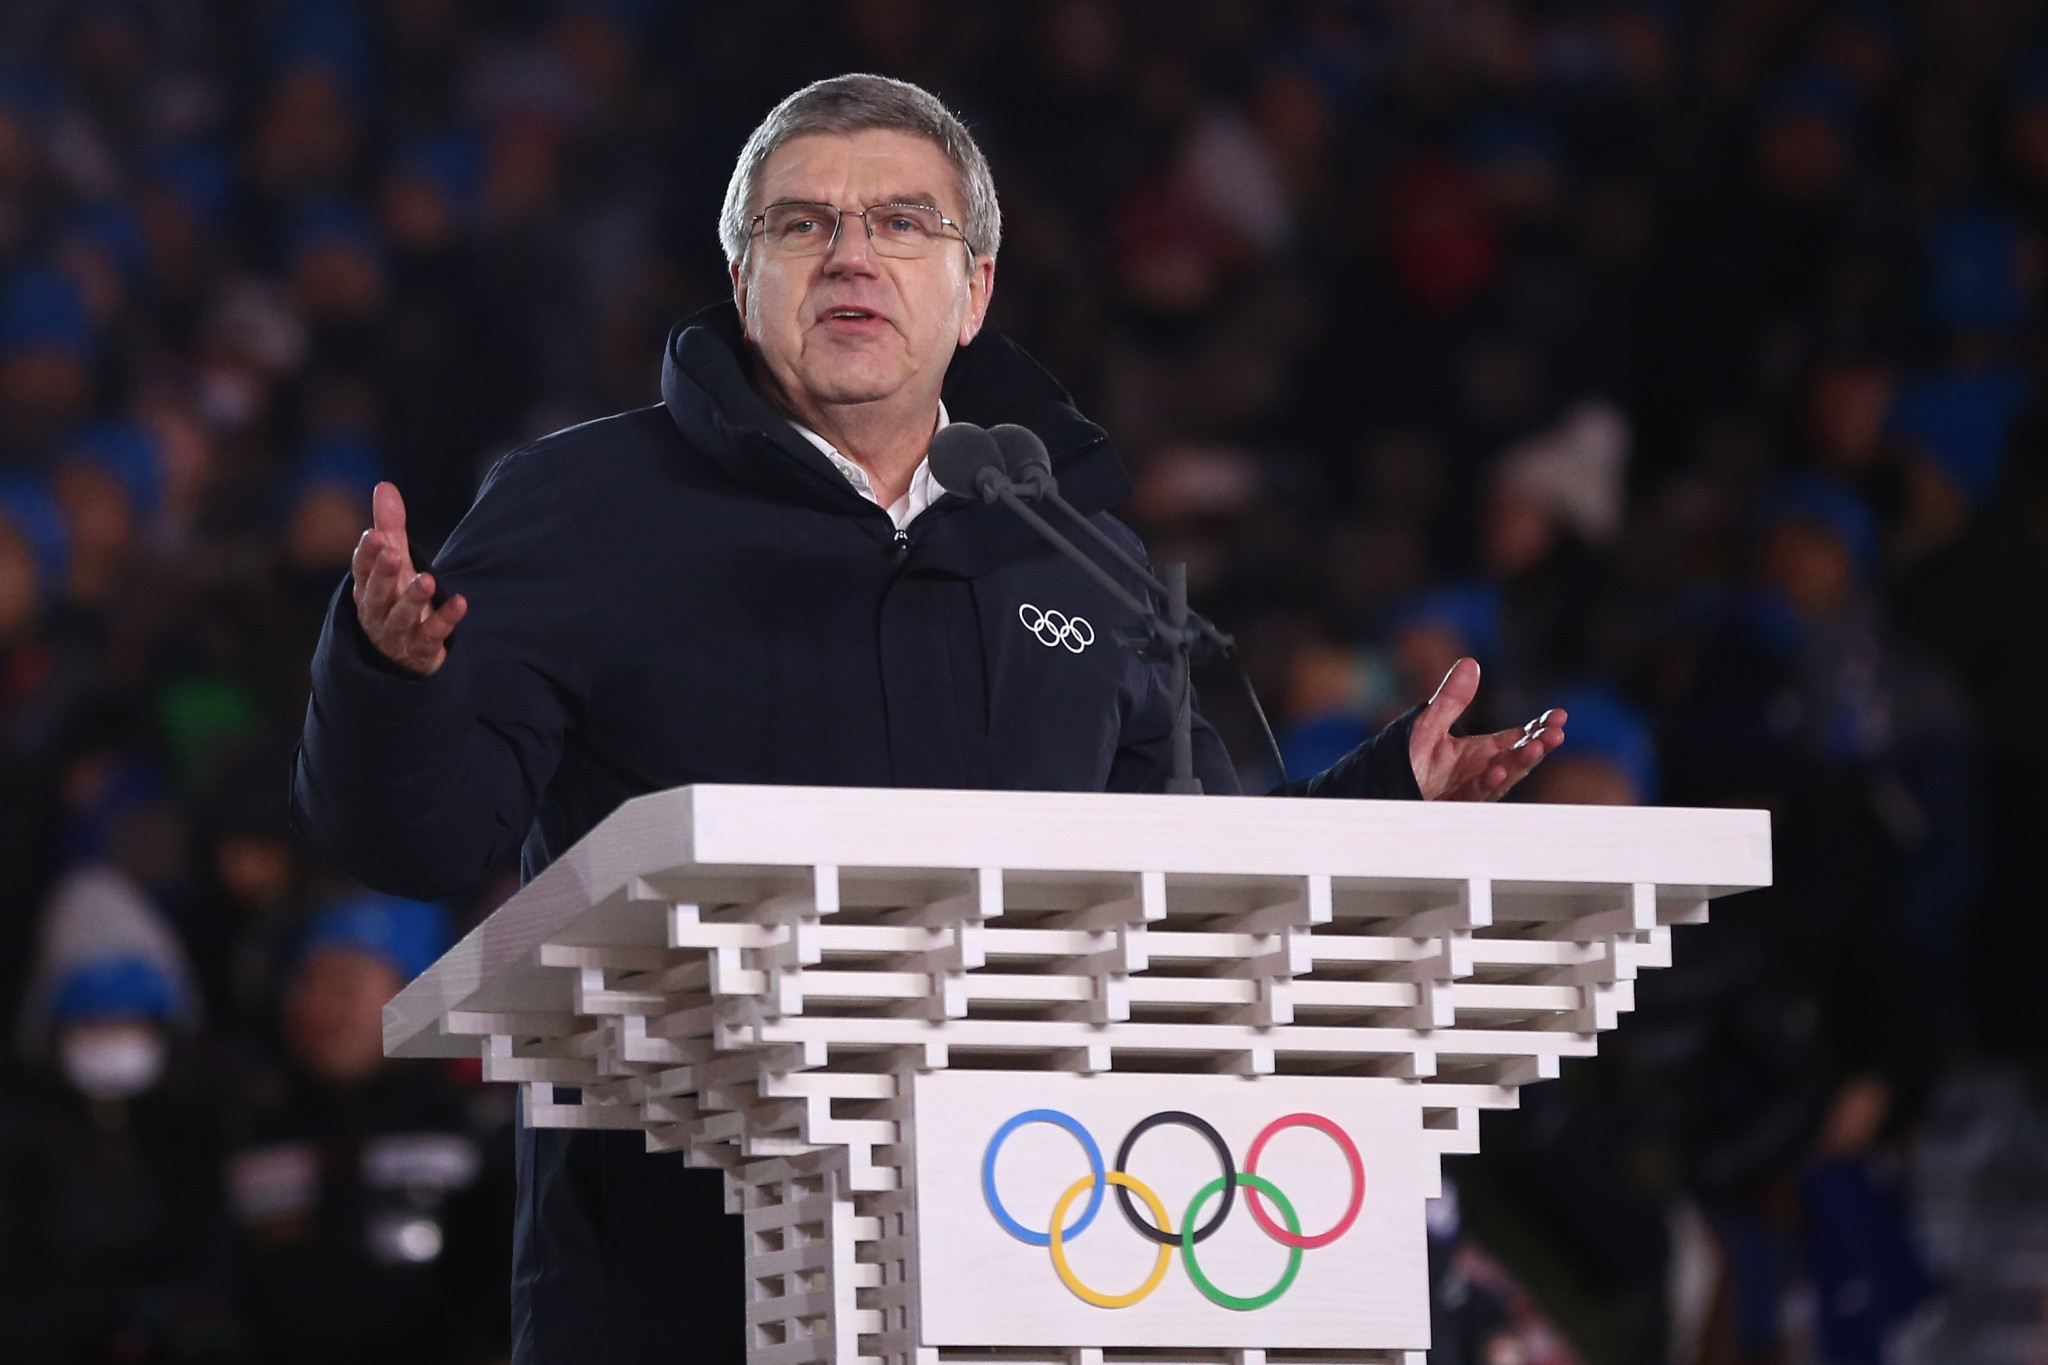 IOC President Thomas Bach was among more than 200,000 visitors to Team Korea House during the Pyeongchang Winter Games ©Getty Images